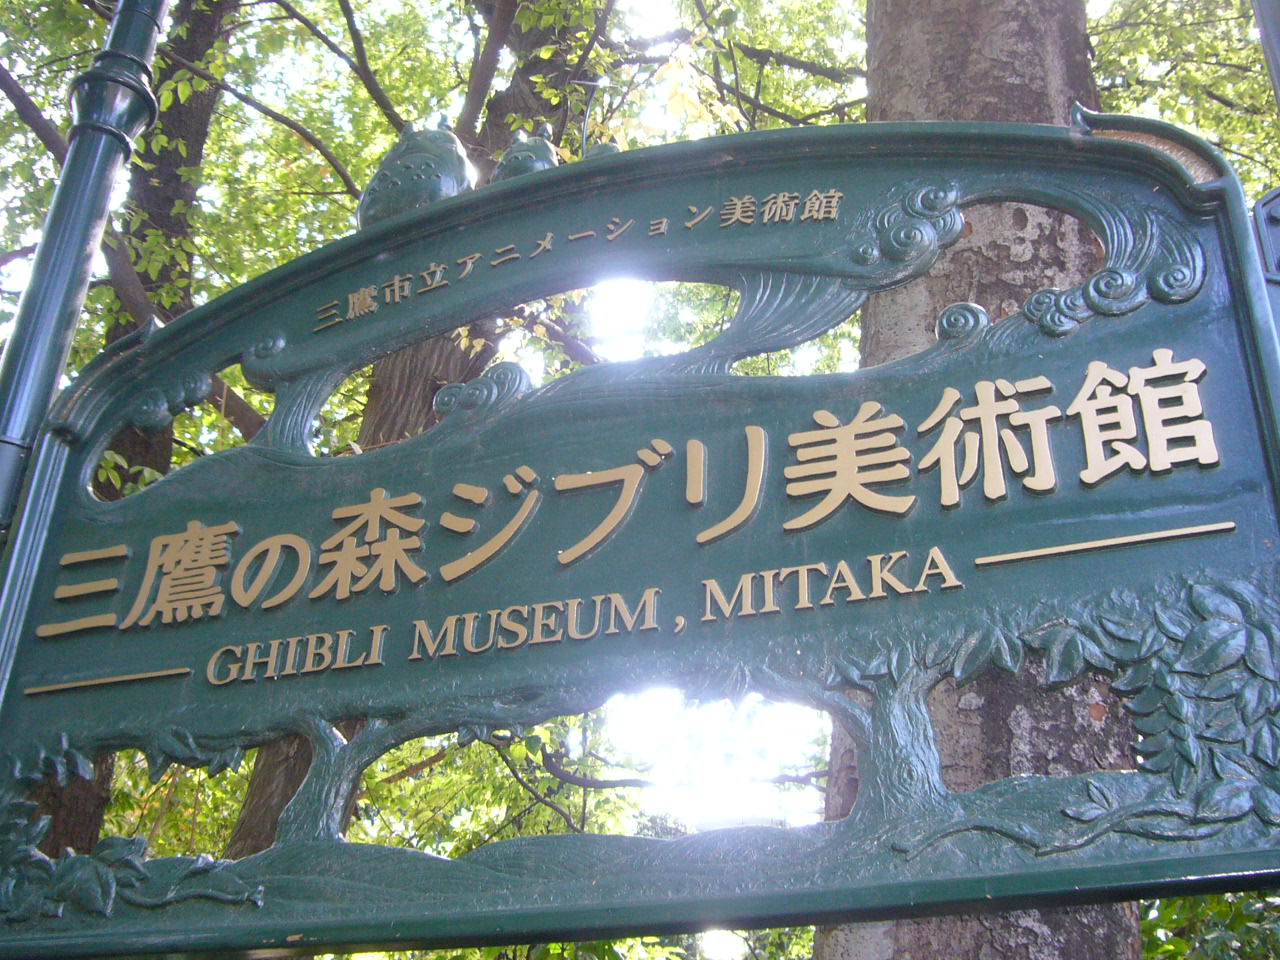 Other. 600m to the Ghibli Museum (Other)